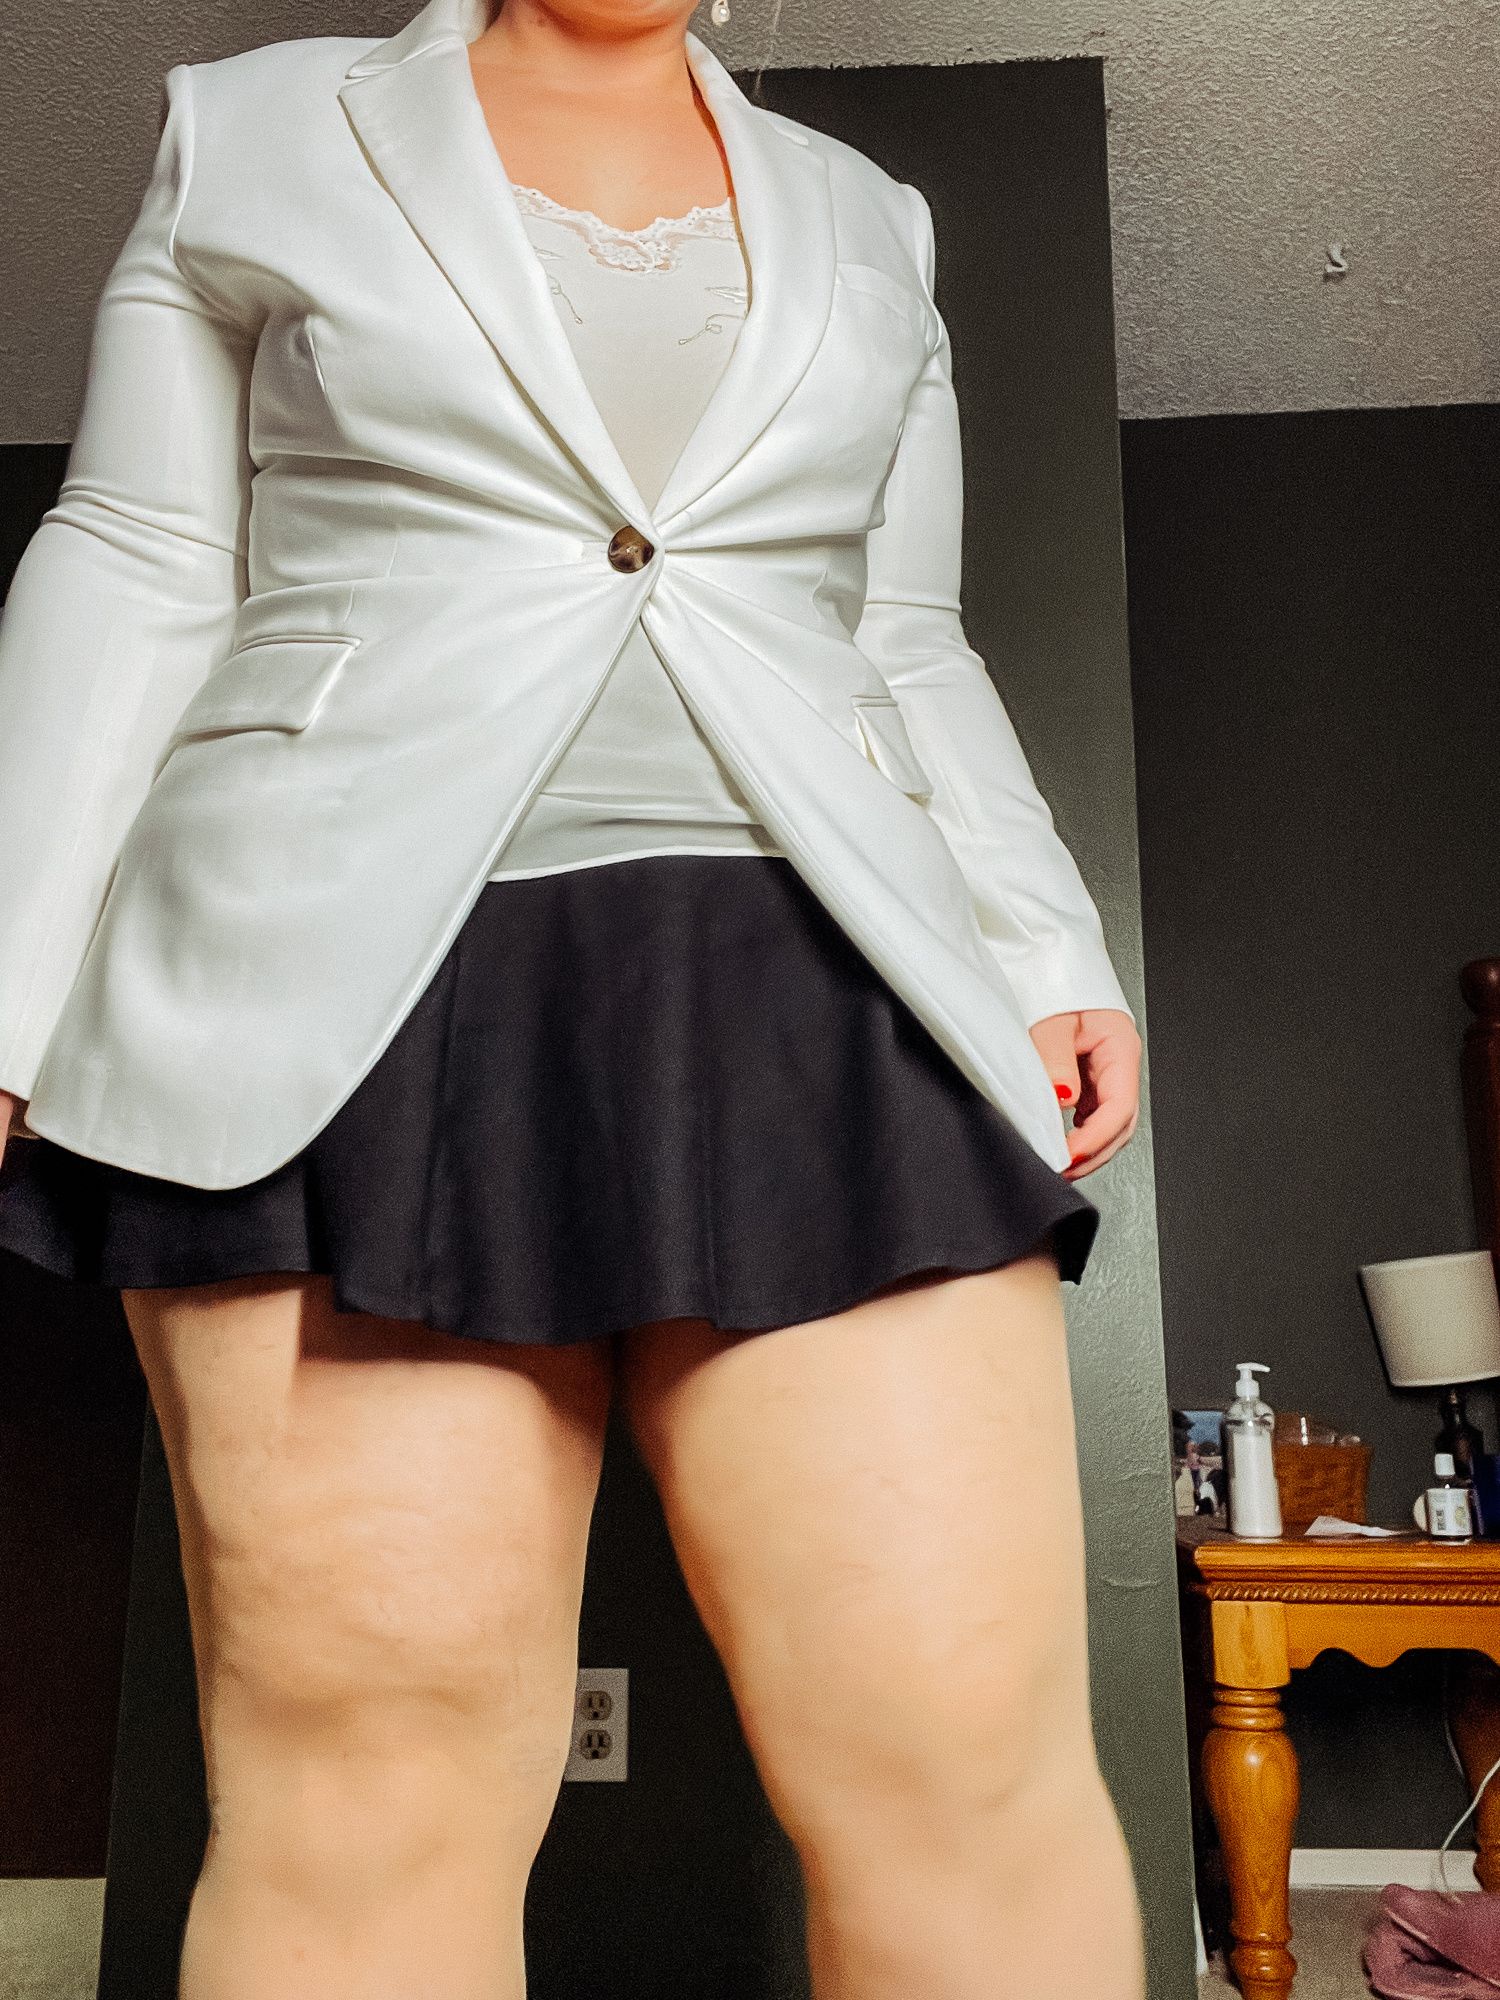 BBW in a mini black skirt and nylons with heels Big Thighs #5